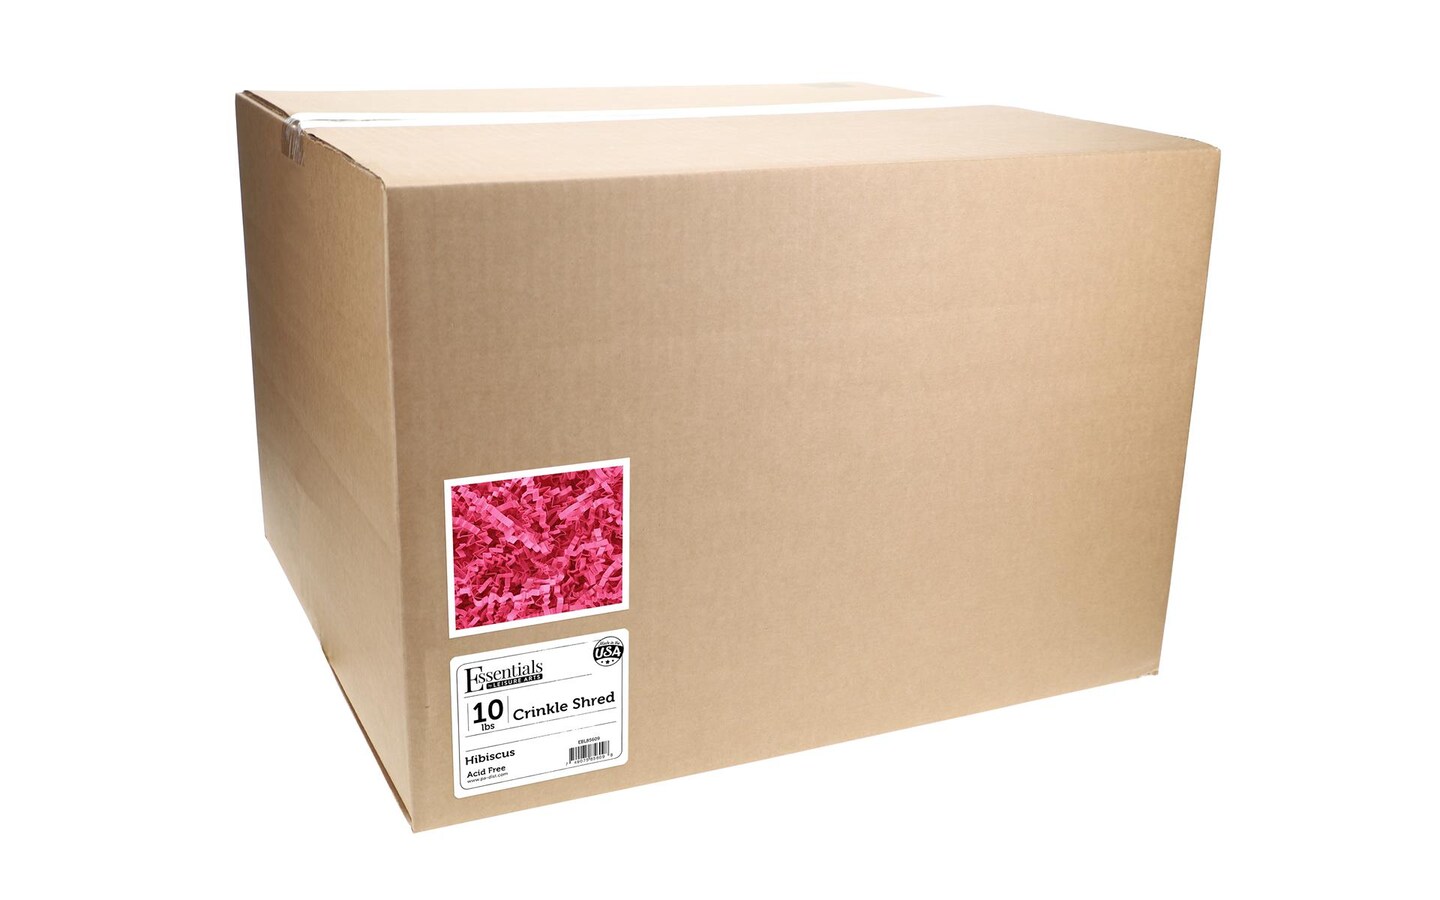 Essentials by Leisure Arts Crinkle Shred Box, Hibiscus, 10lbs Shredded Paper Filler, Crinkle Cut Paper Shred Filler, Box Filler, Shredded Paper for Gift Box, Paper Crinkle Filler, Box Filling